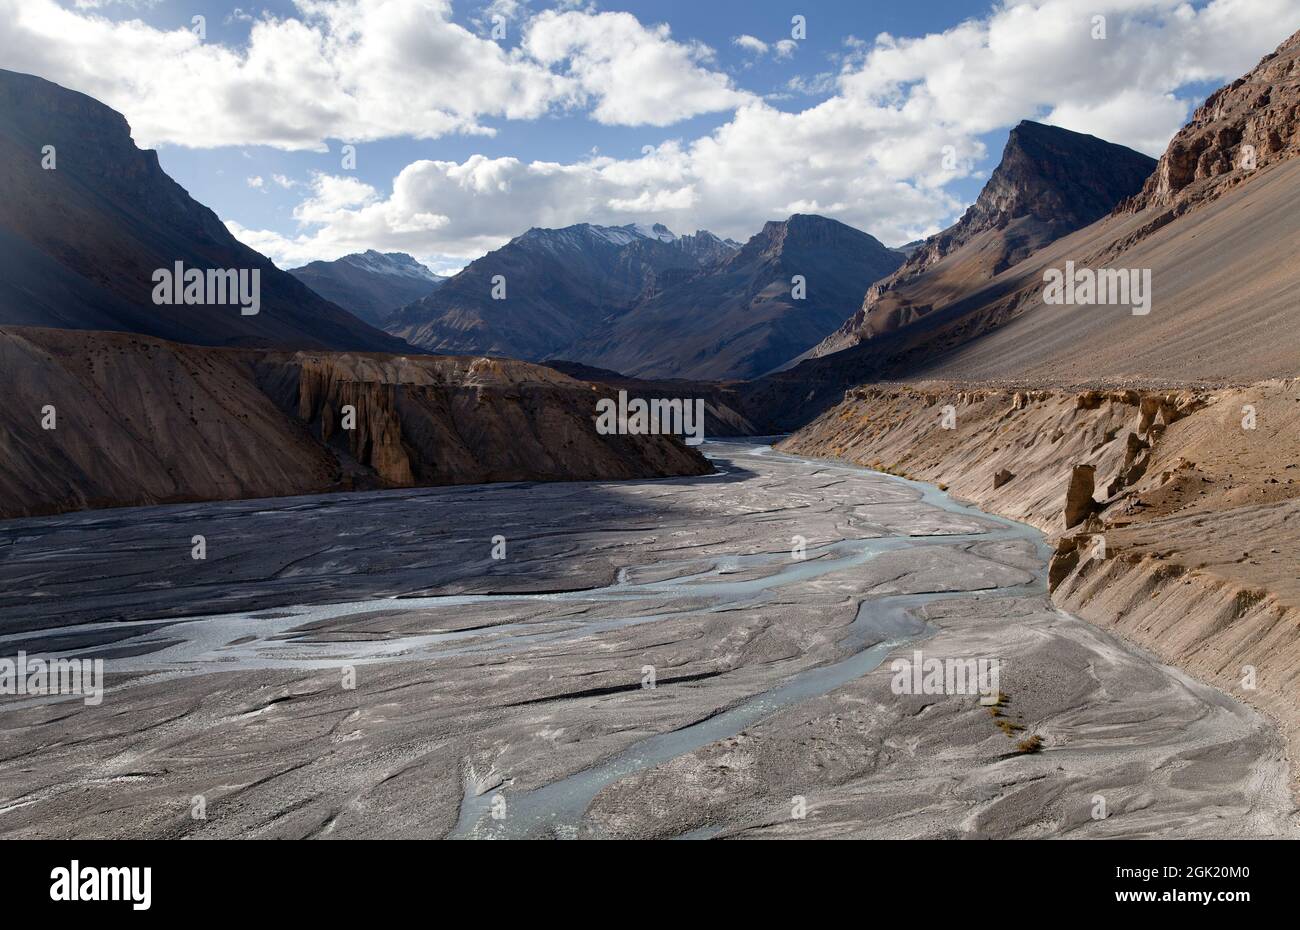 view from Indian himalayas - mountain and river valley - way to Parang La and Takling la passes, passes from Ladakh to Himachal Pradesh - India Stock Photo